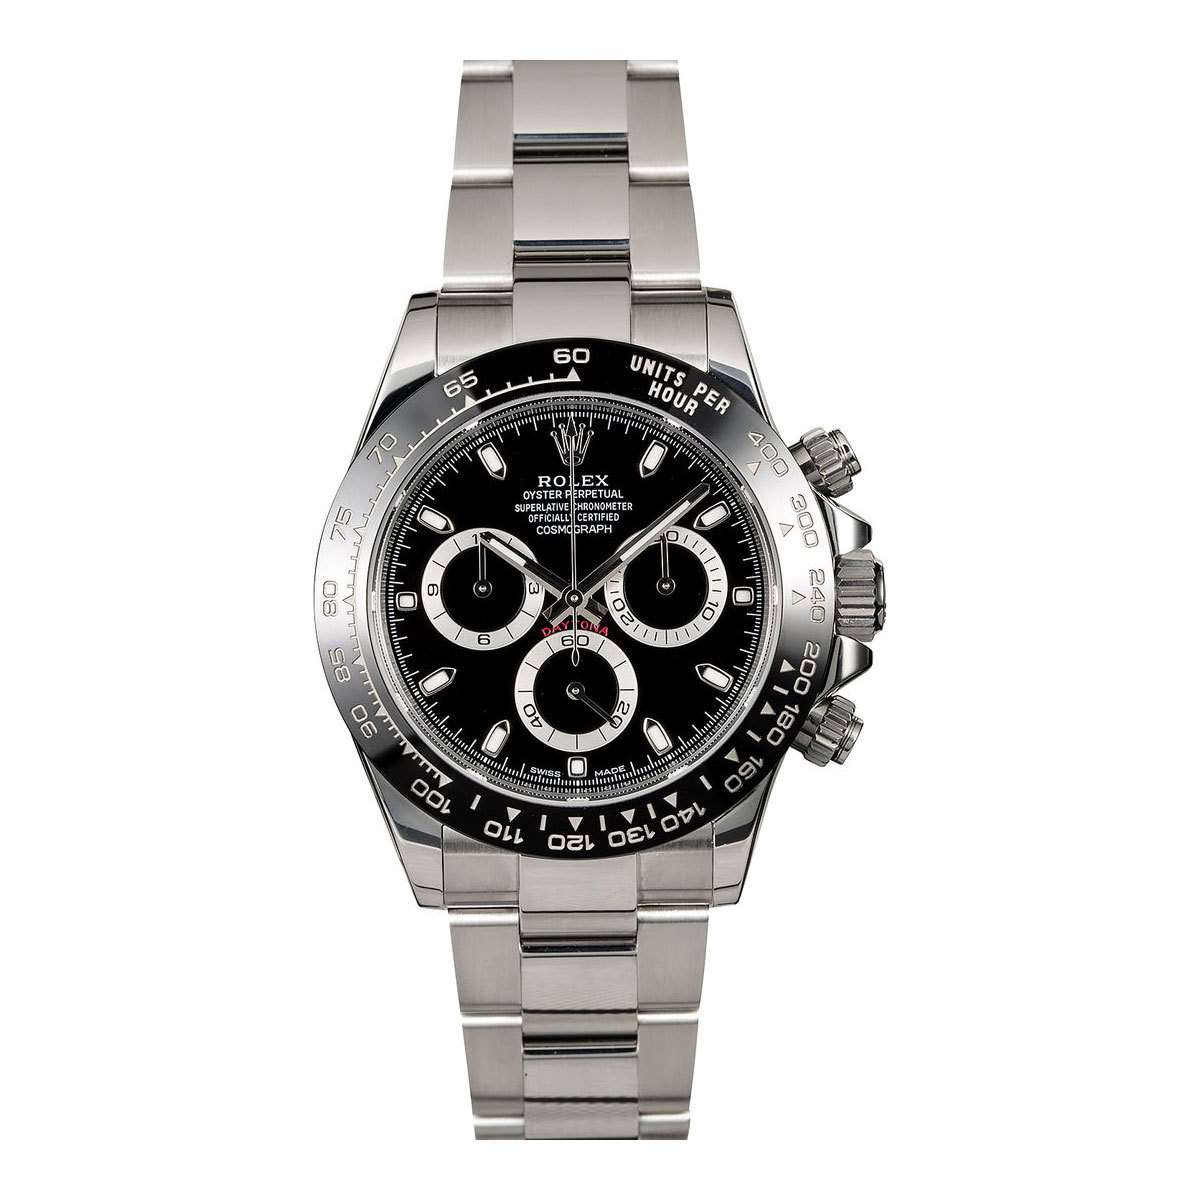 Rolex Daytona Ref 116500LN A Stainless Steel Chronograph Wristwatch with Bracelet Circa 2018 offered by Sotheby's